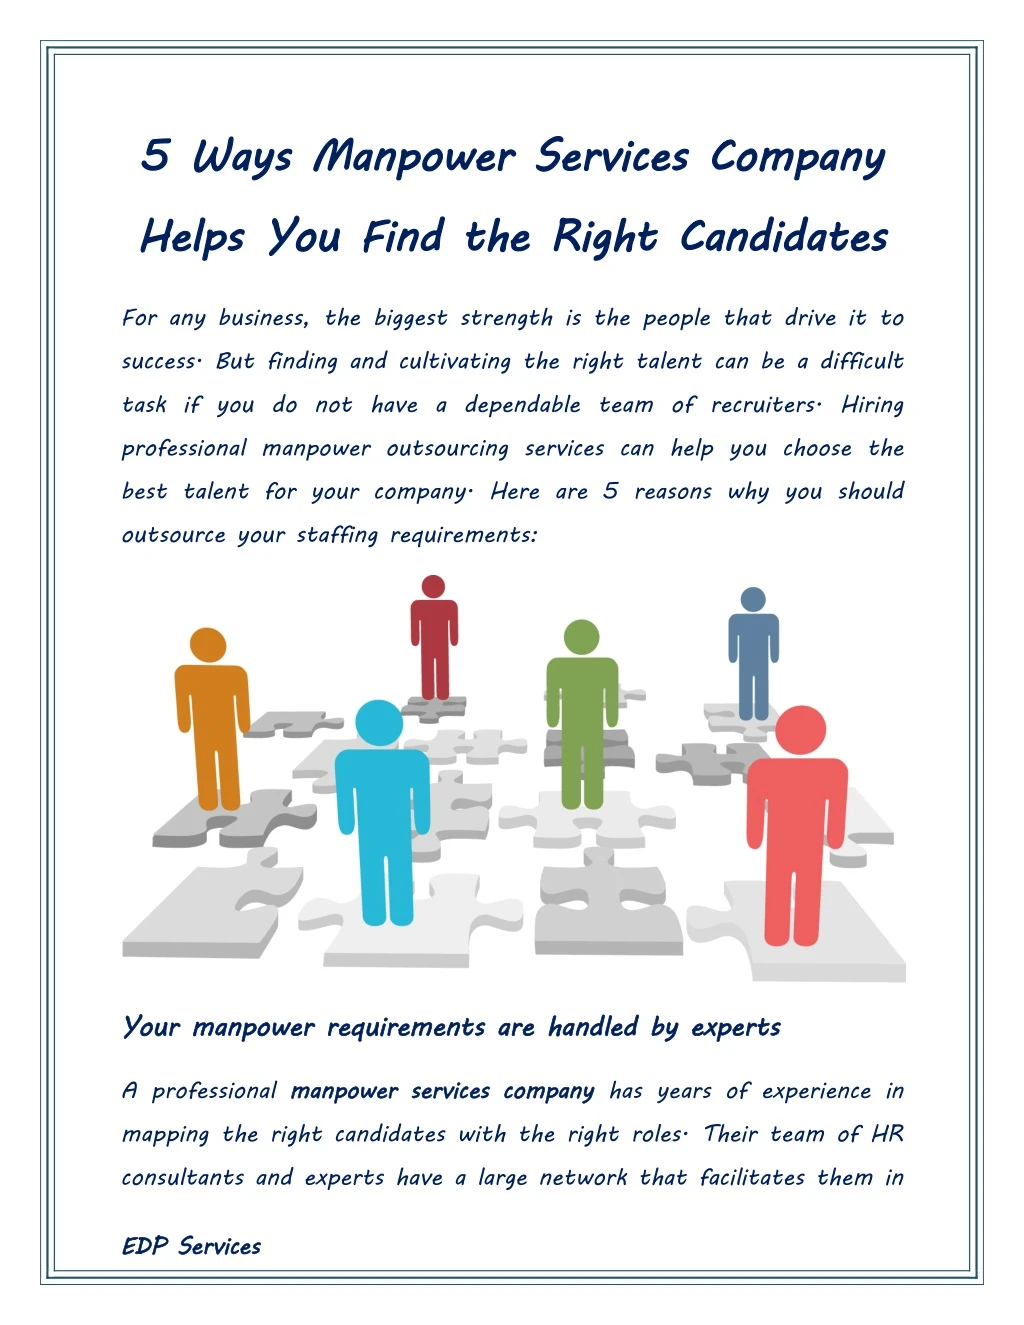 5 helps you find the right candidates